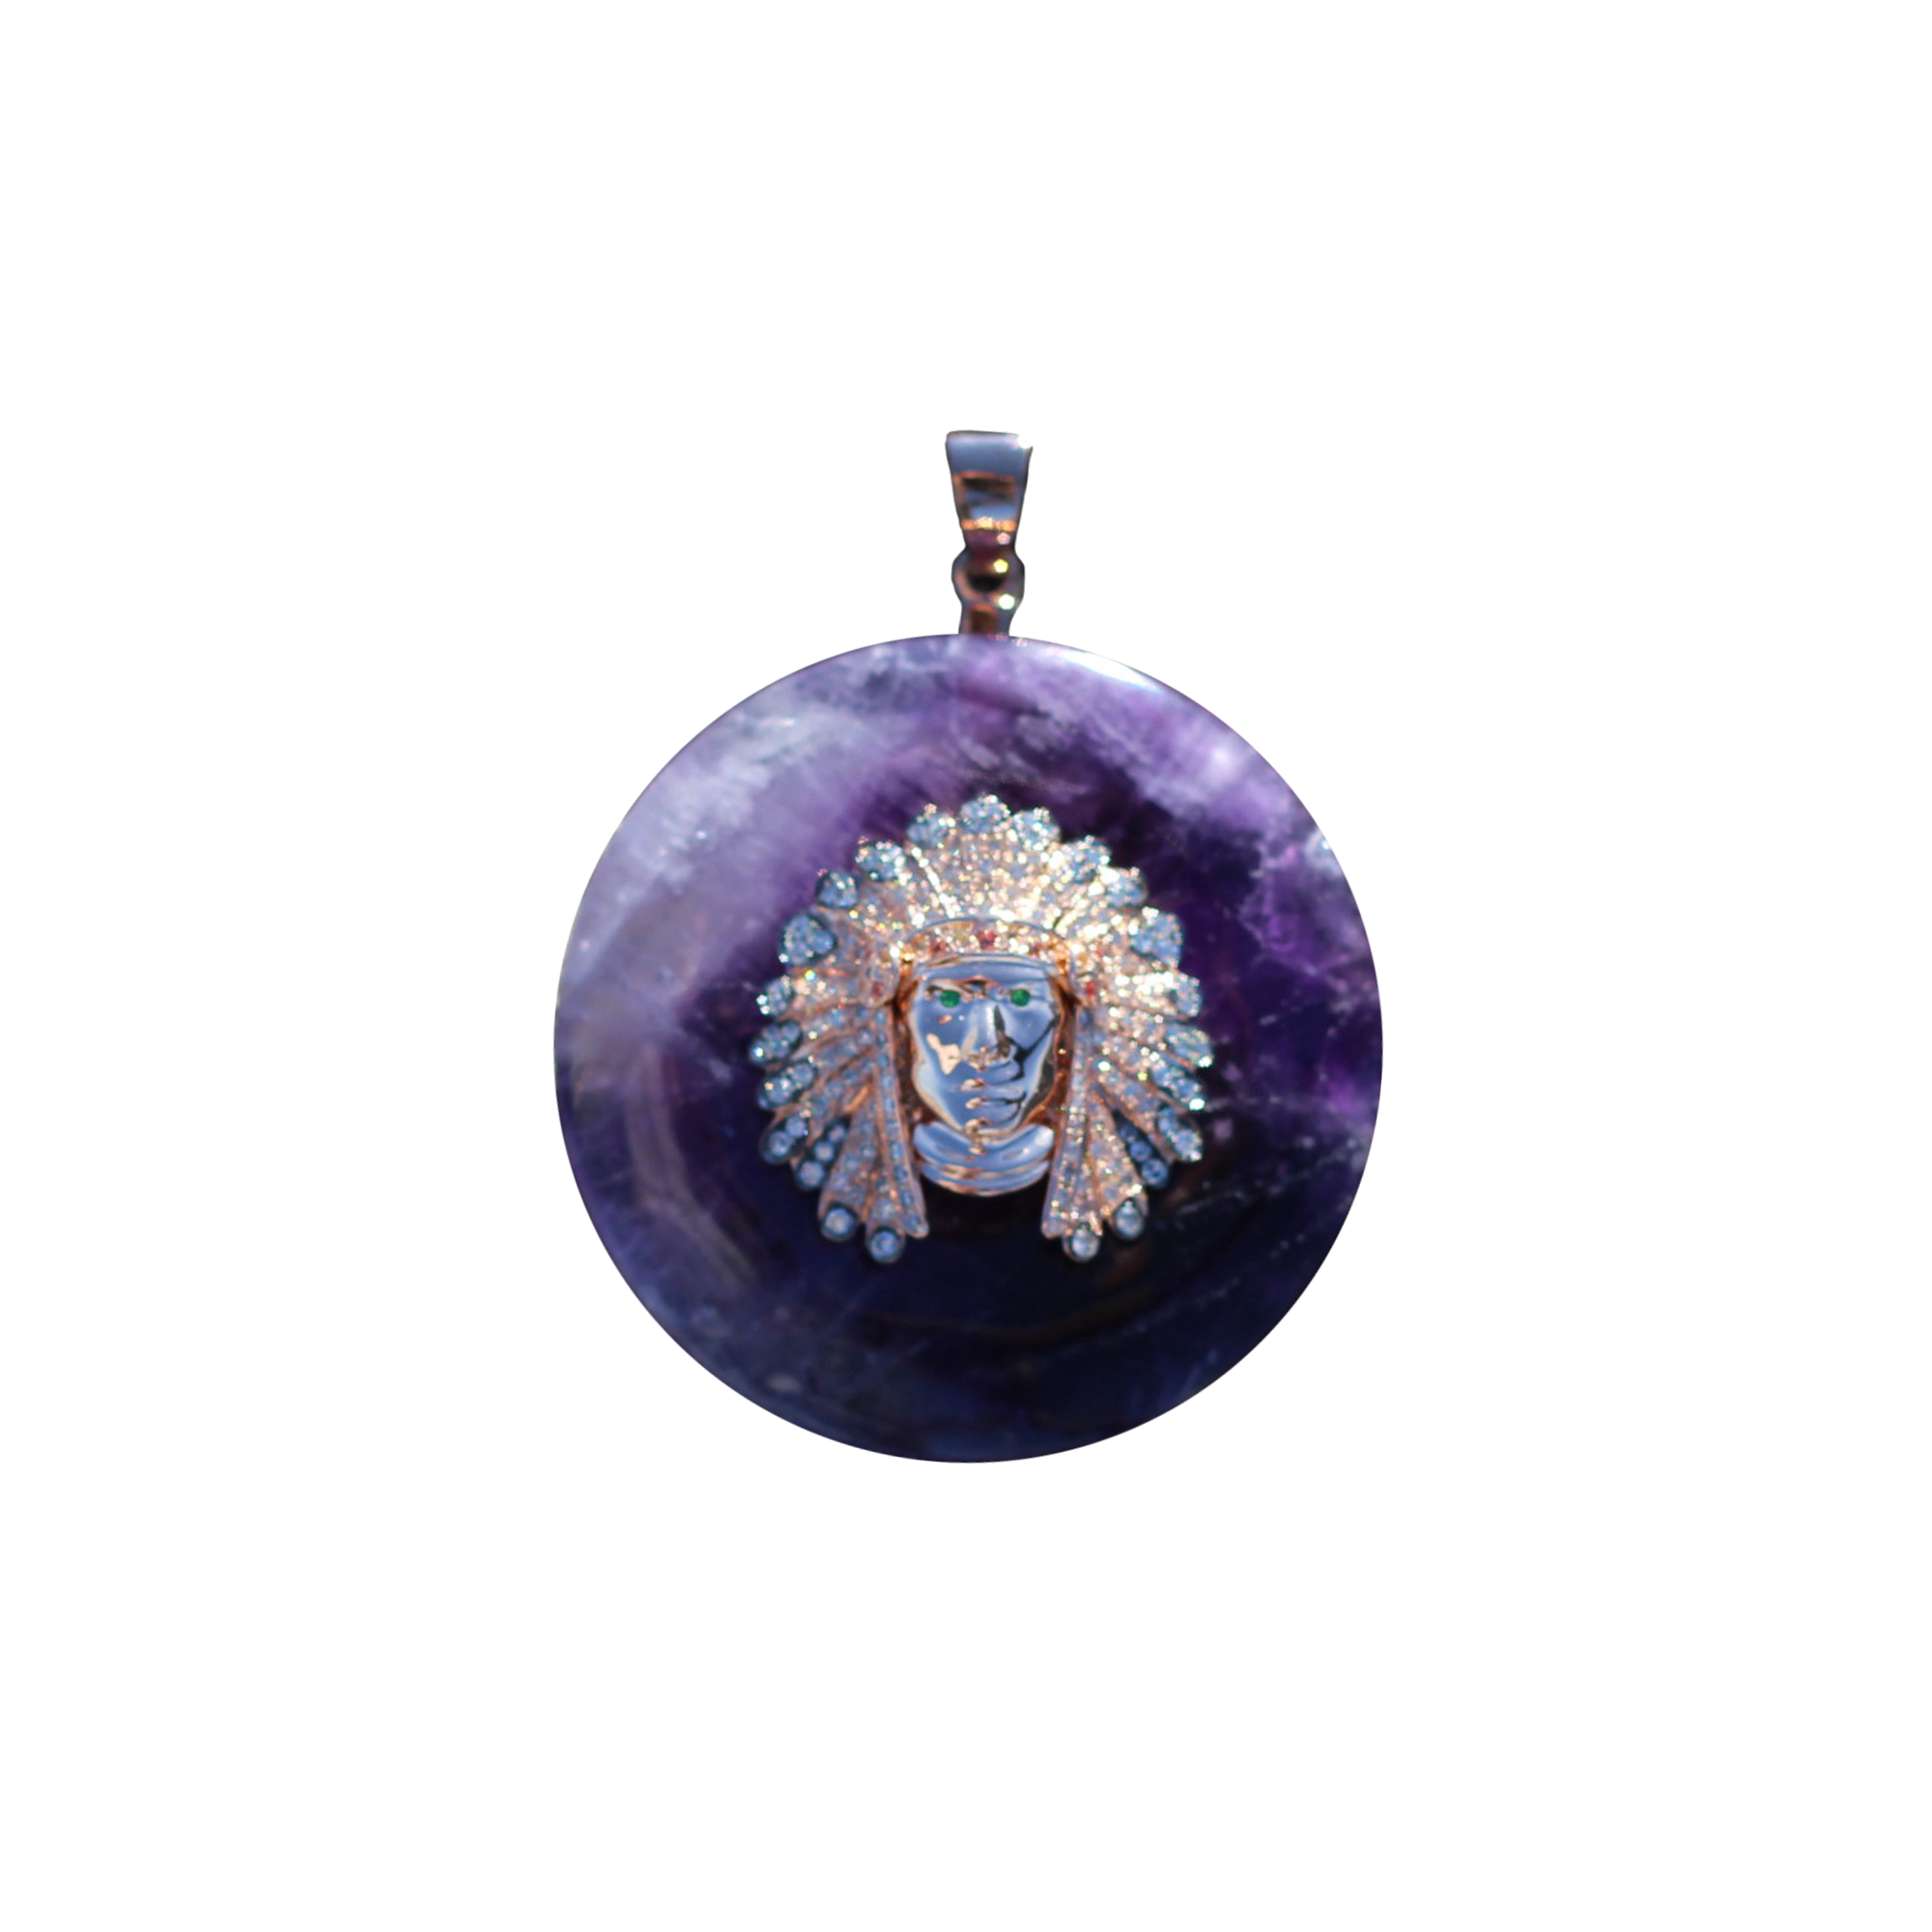 18 kt rose gold with white, champagne and silver diamonds Native American Indian Headdress with Amethyst Crystal toroid